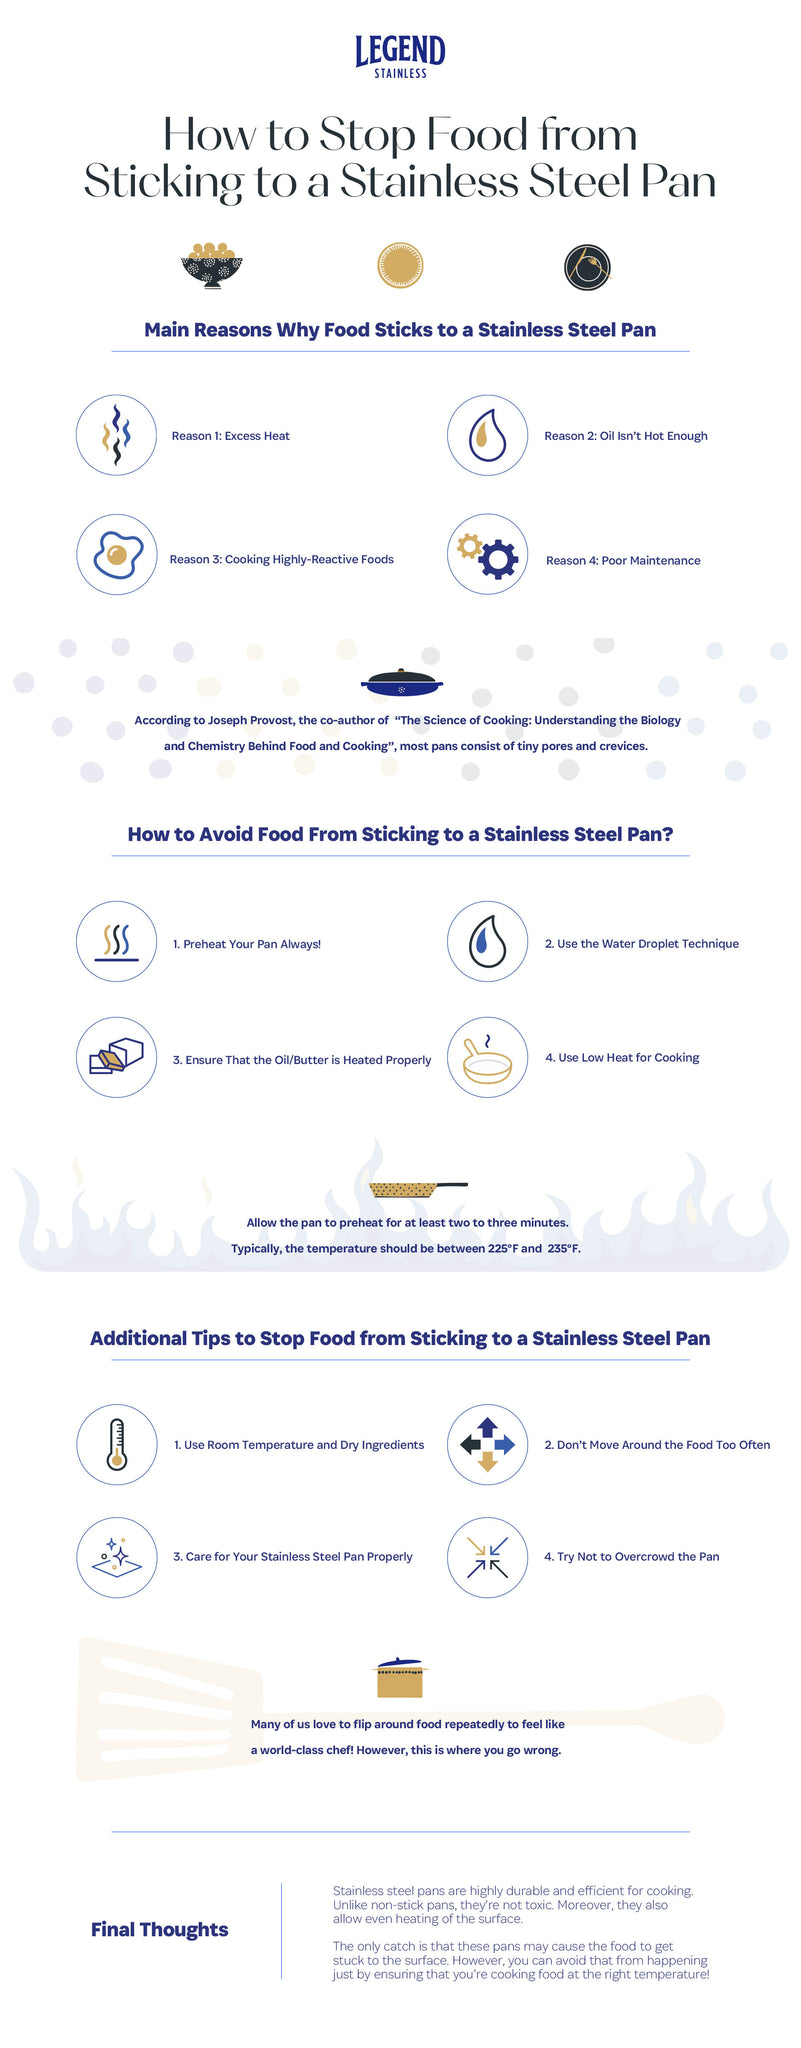 How to Stop Food from Sticking to a Stainless Steel Pan infographic